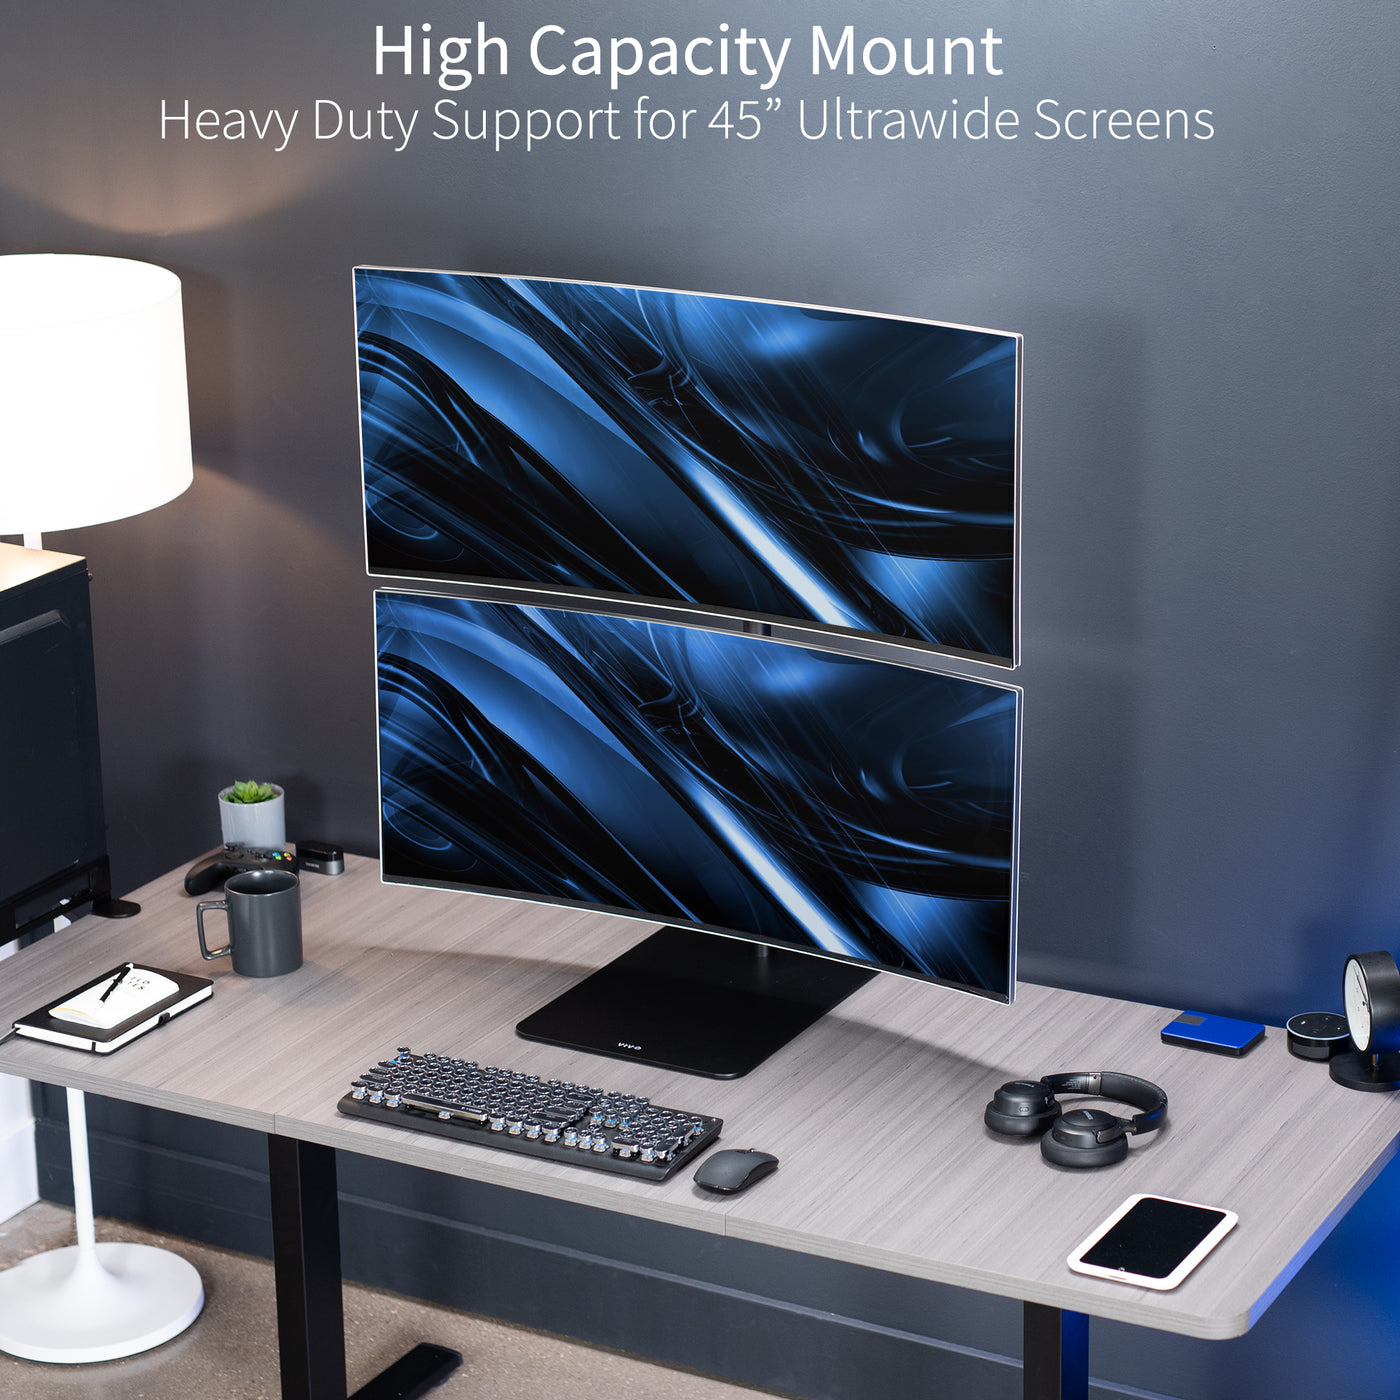 Dual Ultrawide Vertical Monitor Desk Stand elevates 2 large monitors in a vertically stacked array for comfortable viewing angles and efficient use of desk space. The freestanding base provides excellent support with no need to drill or clamp into your desktop.